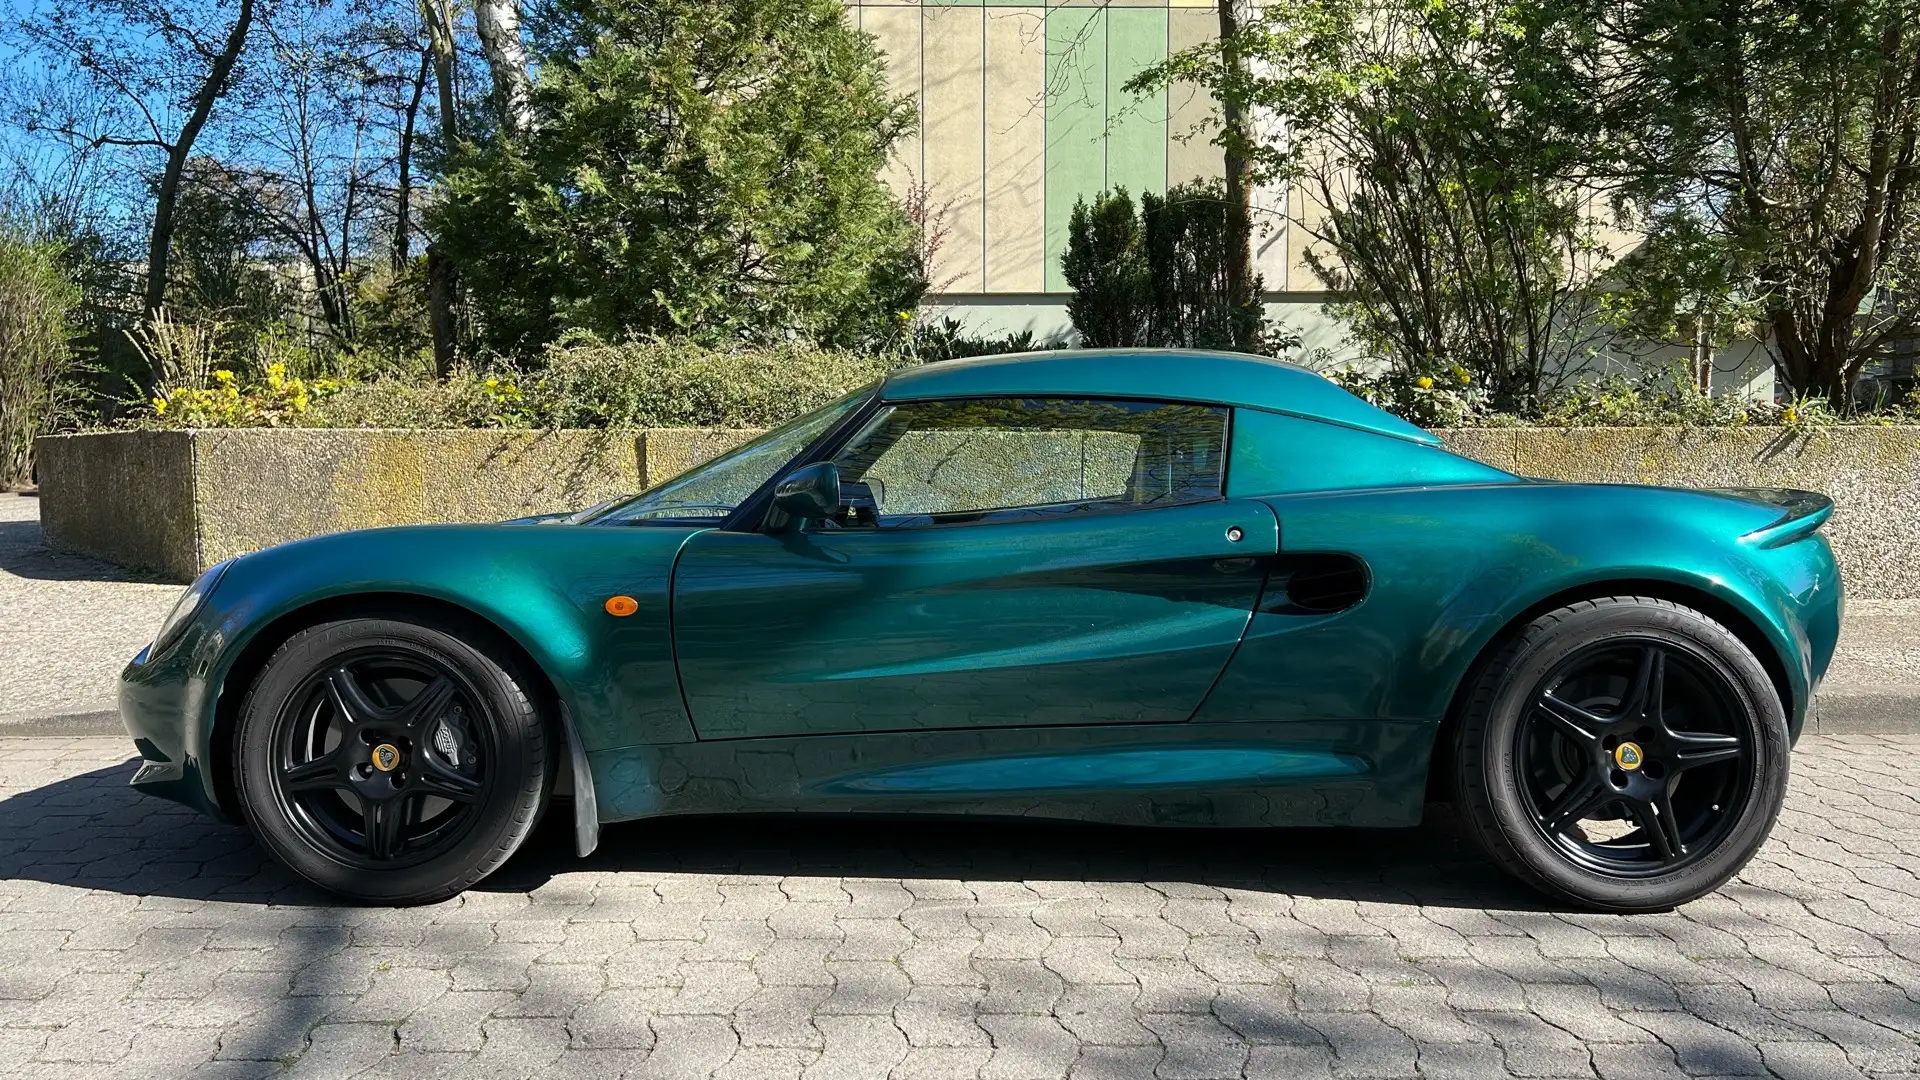 Lotus Elise LHD, Rotec, sehr guter Zustand Zielony - 1